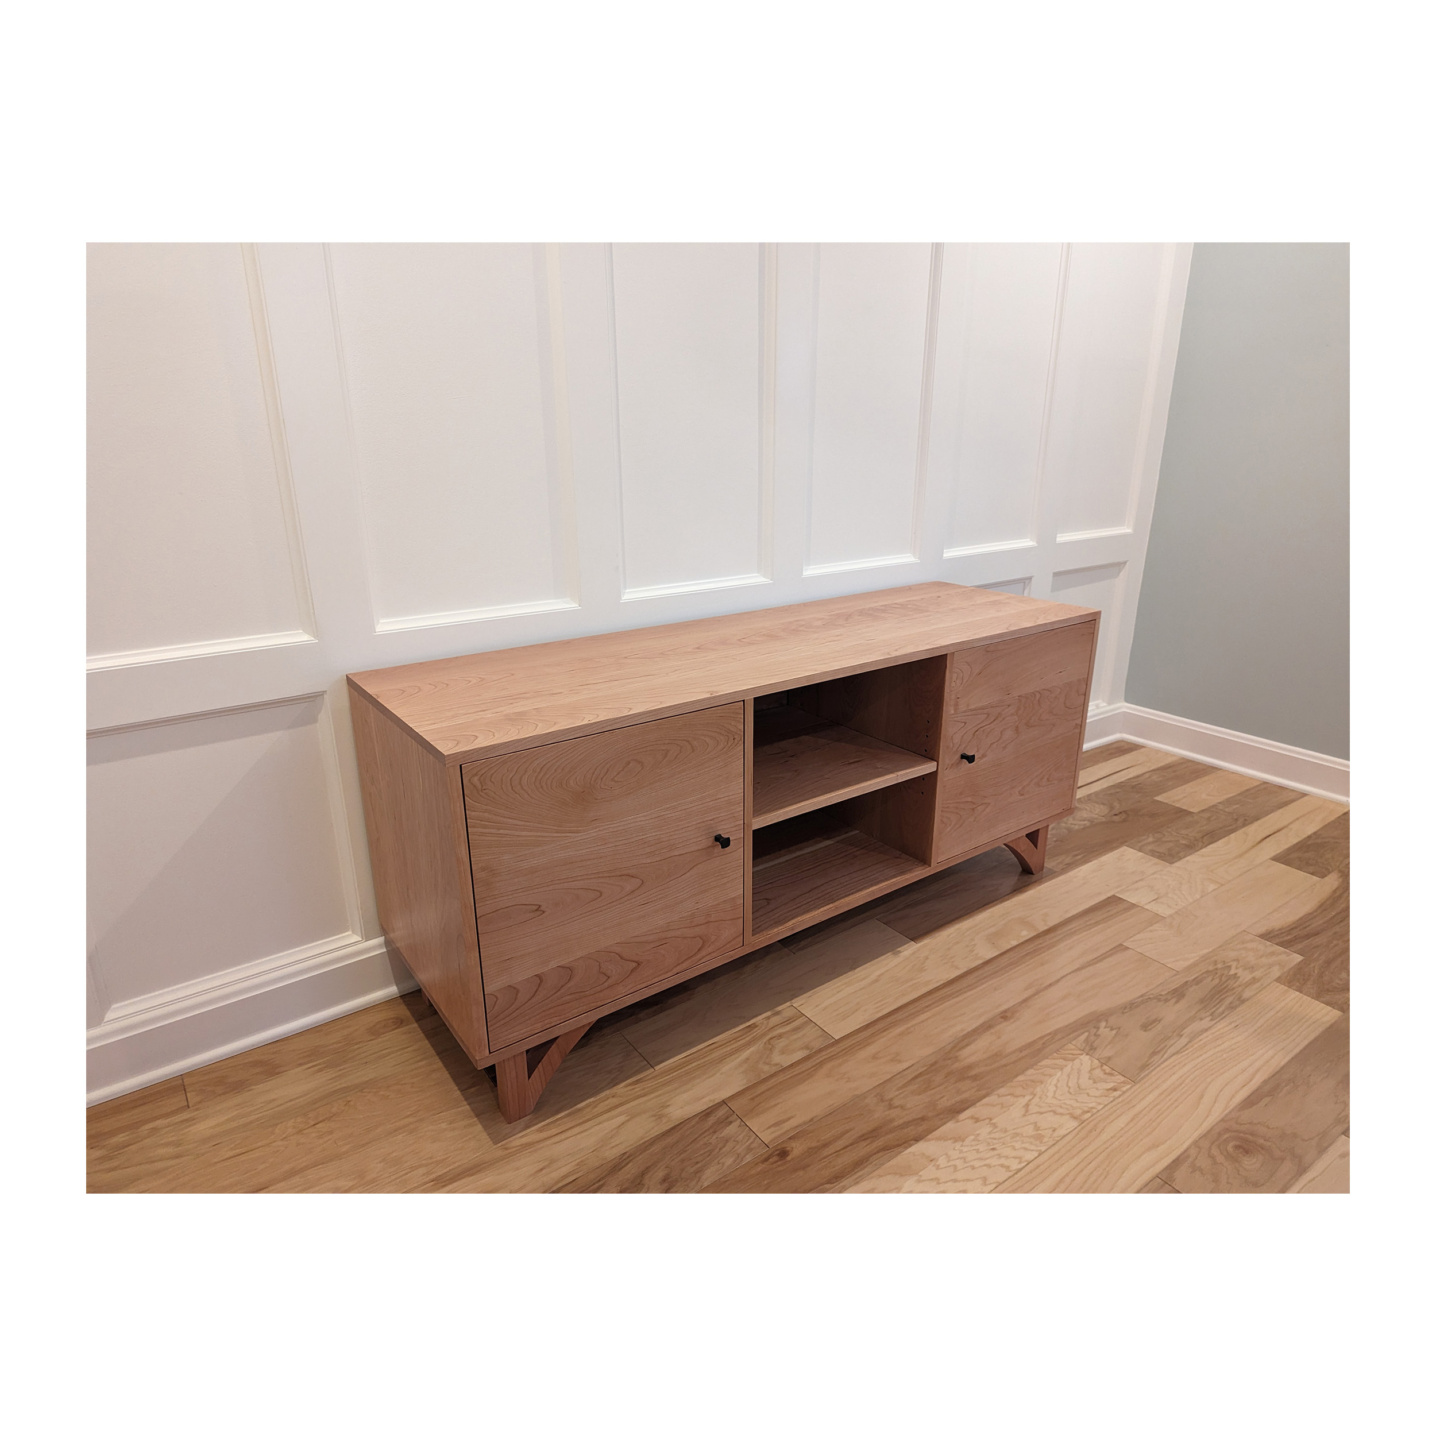 Solid wood modern media cabinet the media console is 60inches in length with two doors--Made by 57NorthPlank Tailored Modern Furniture